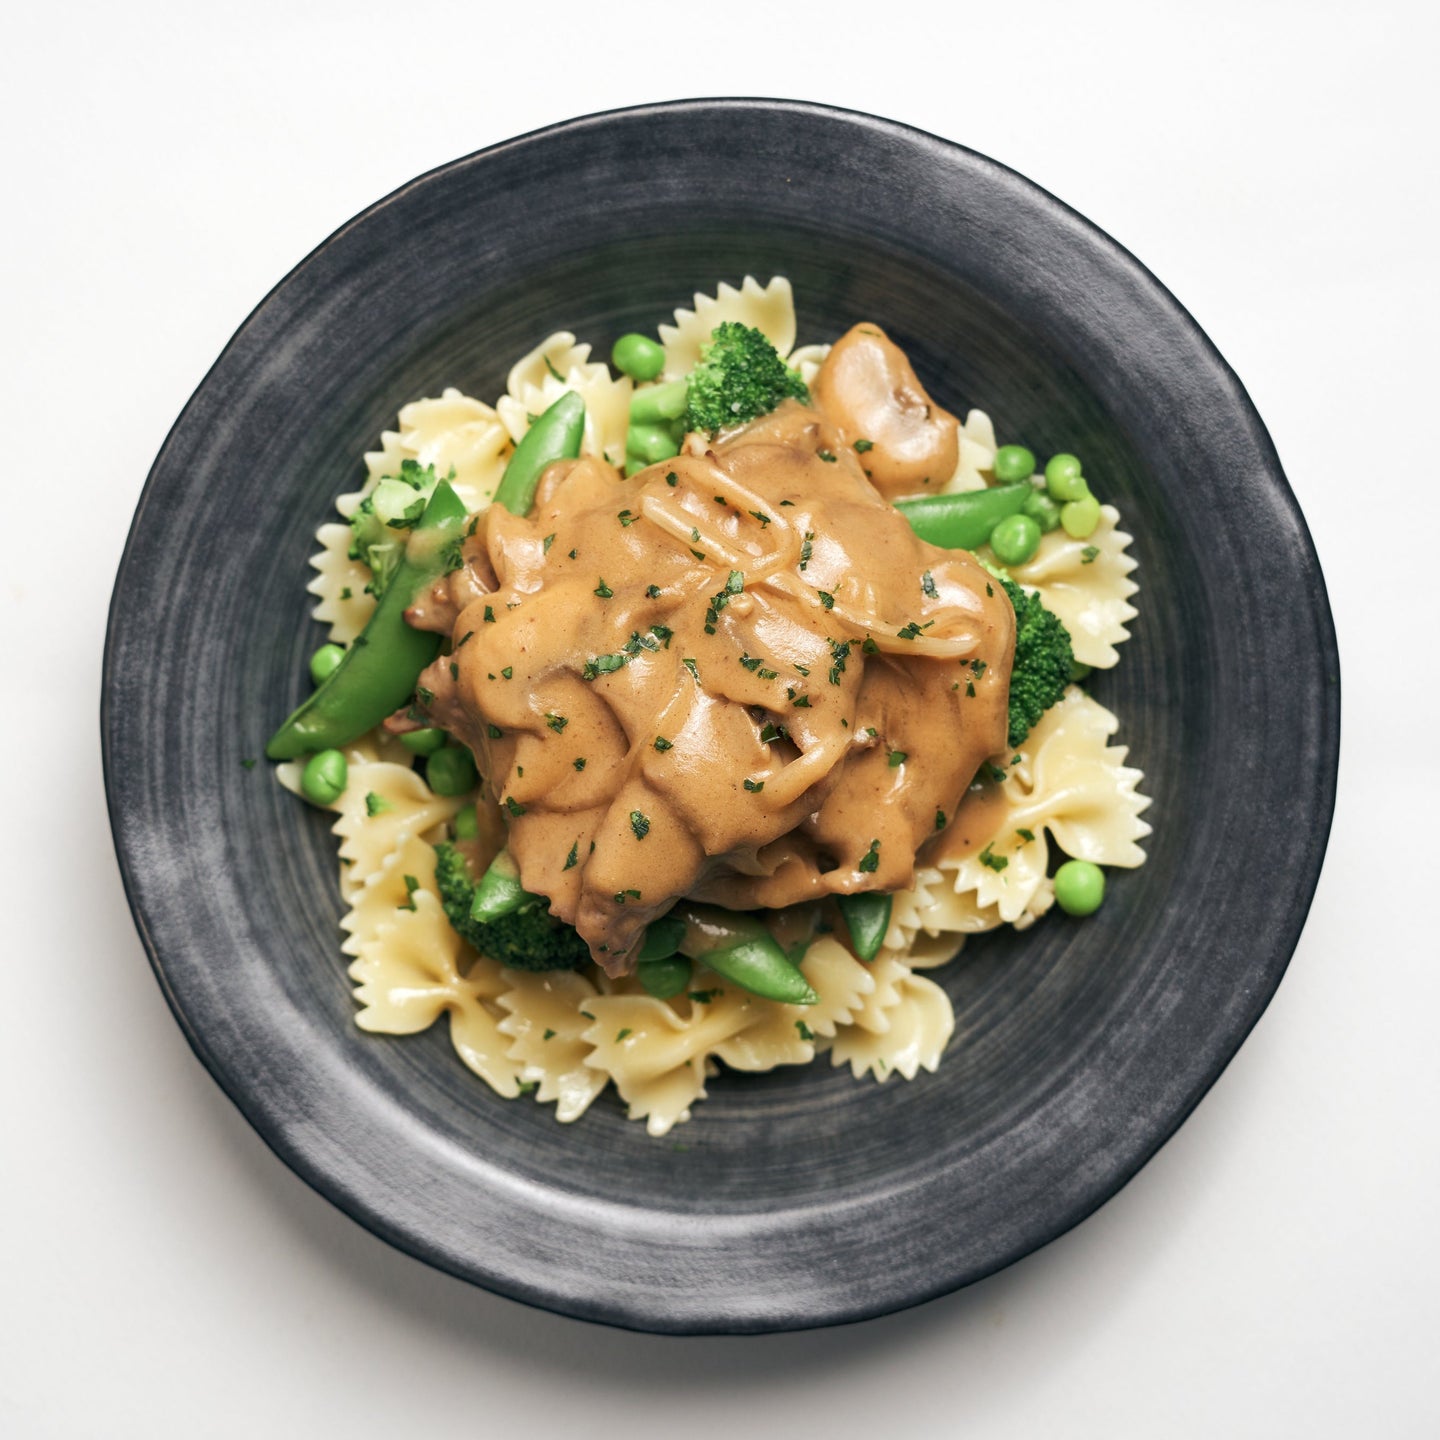 Low Fat Beef Stroganoff with Steamed Green Vegetables & Fusilli Pasta